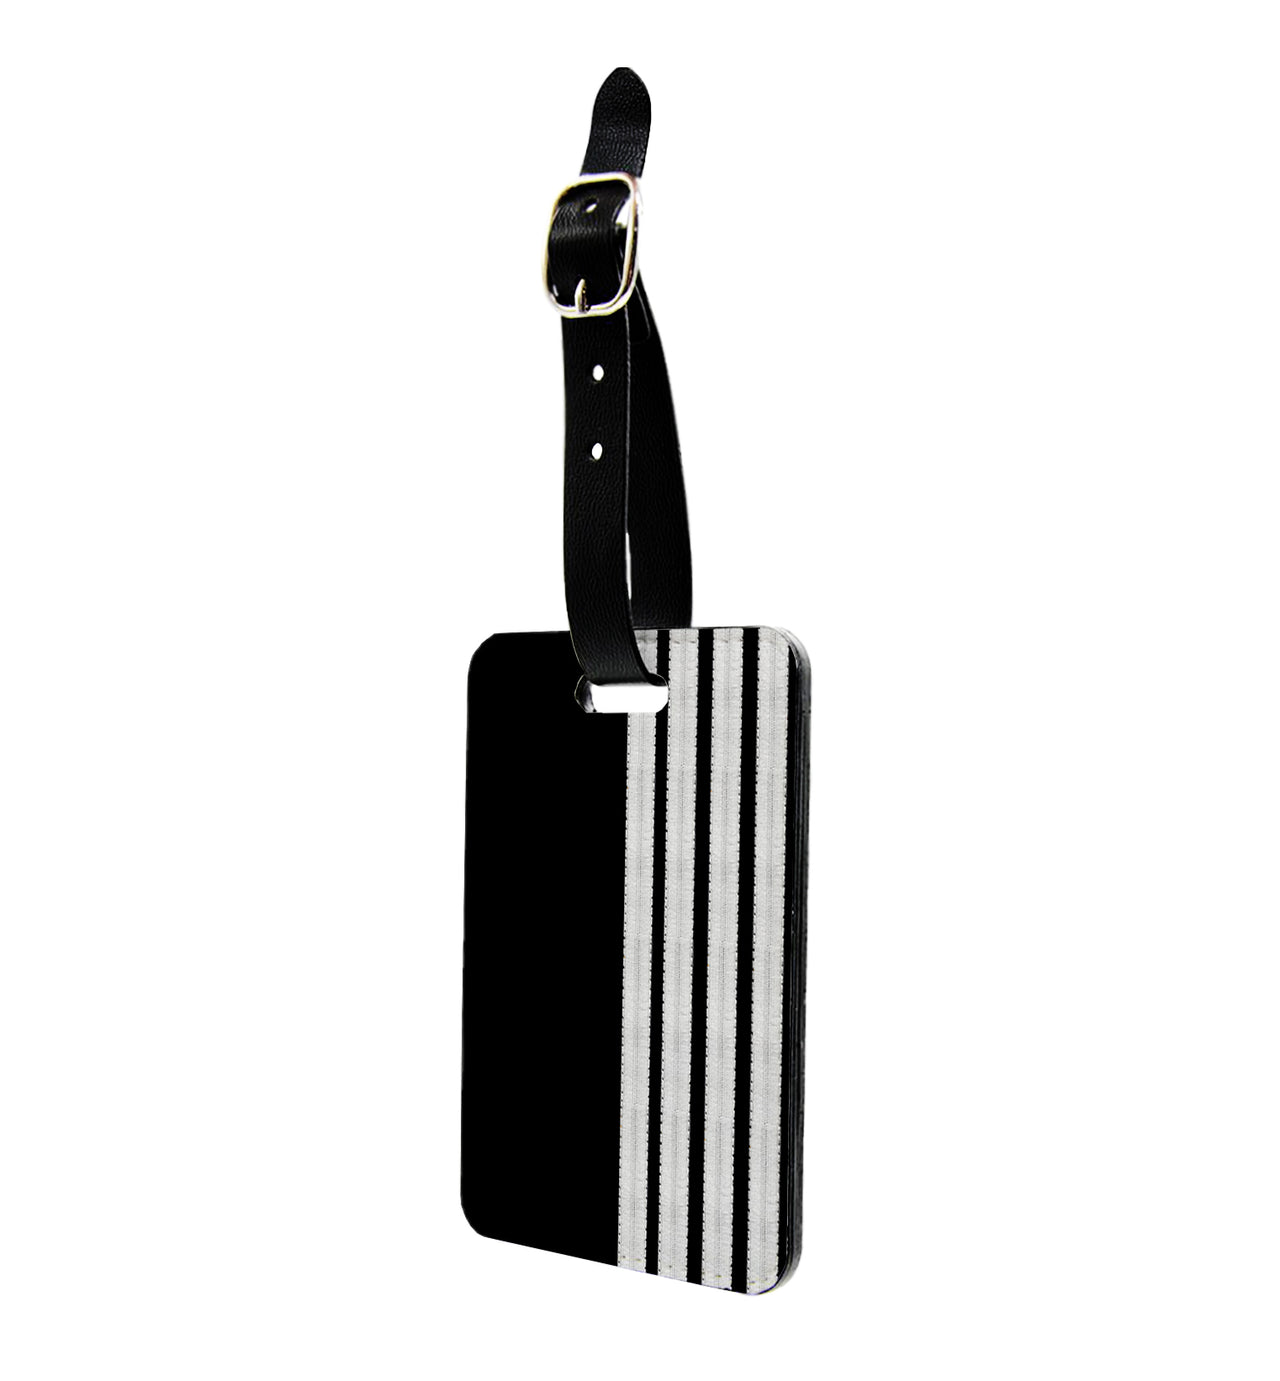 Special Silver Epaulettes (4,3,2 Lines) Designed Luggage Tag